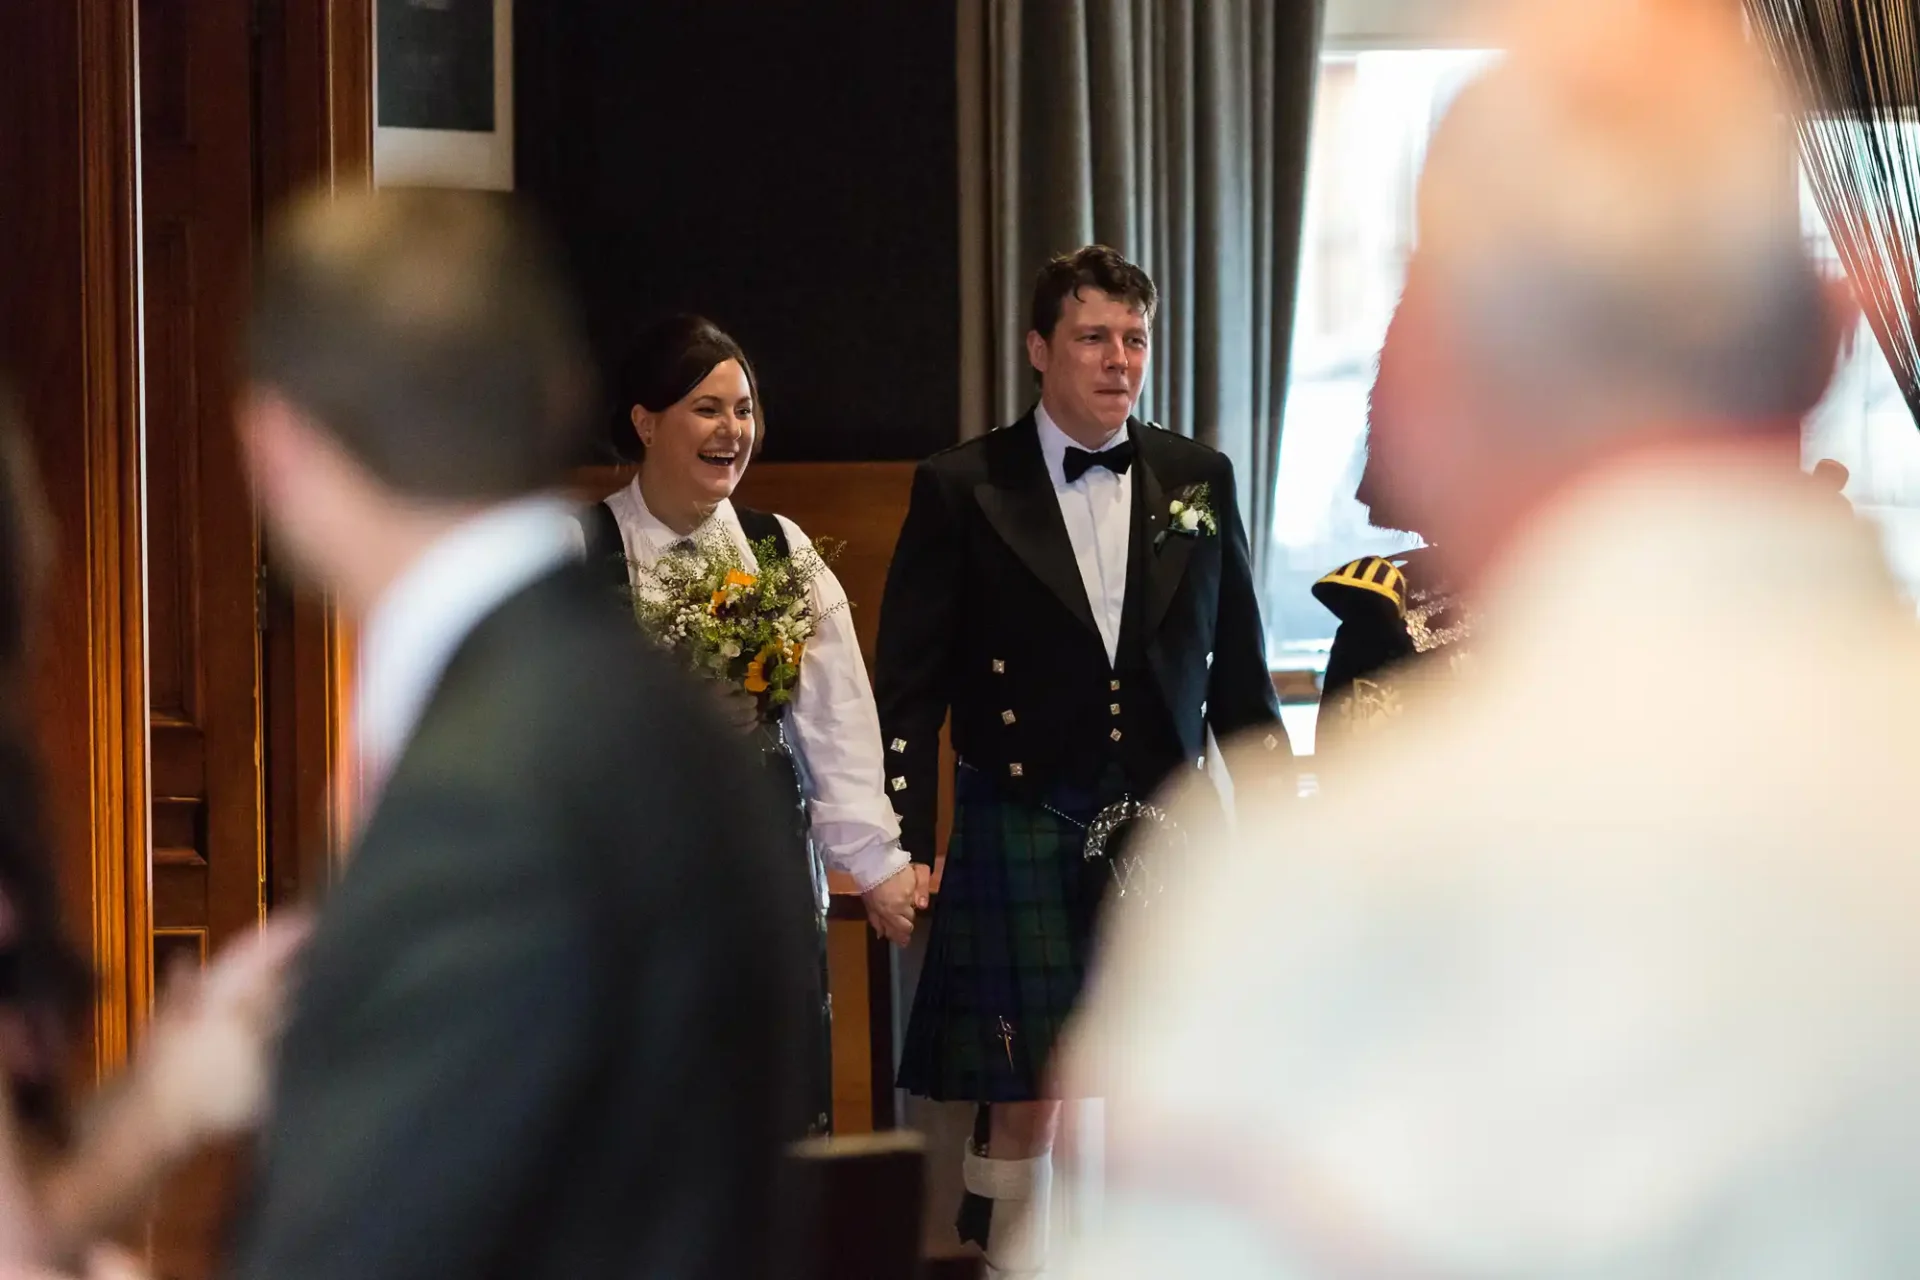 Bride and groom smiling as they walk down the aisle, the bride in a white dress and the groom in a kilt.